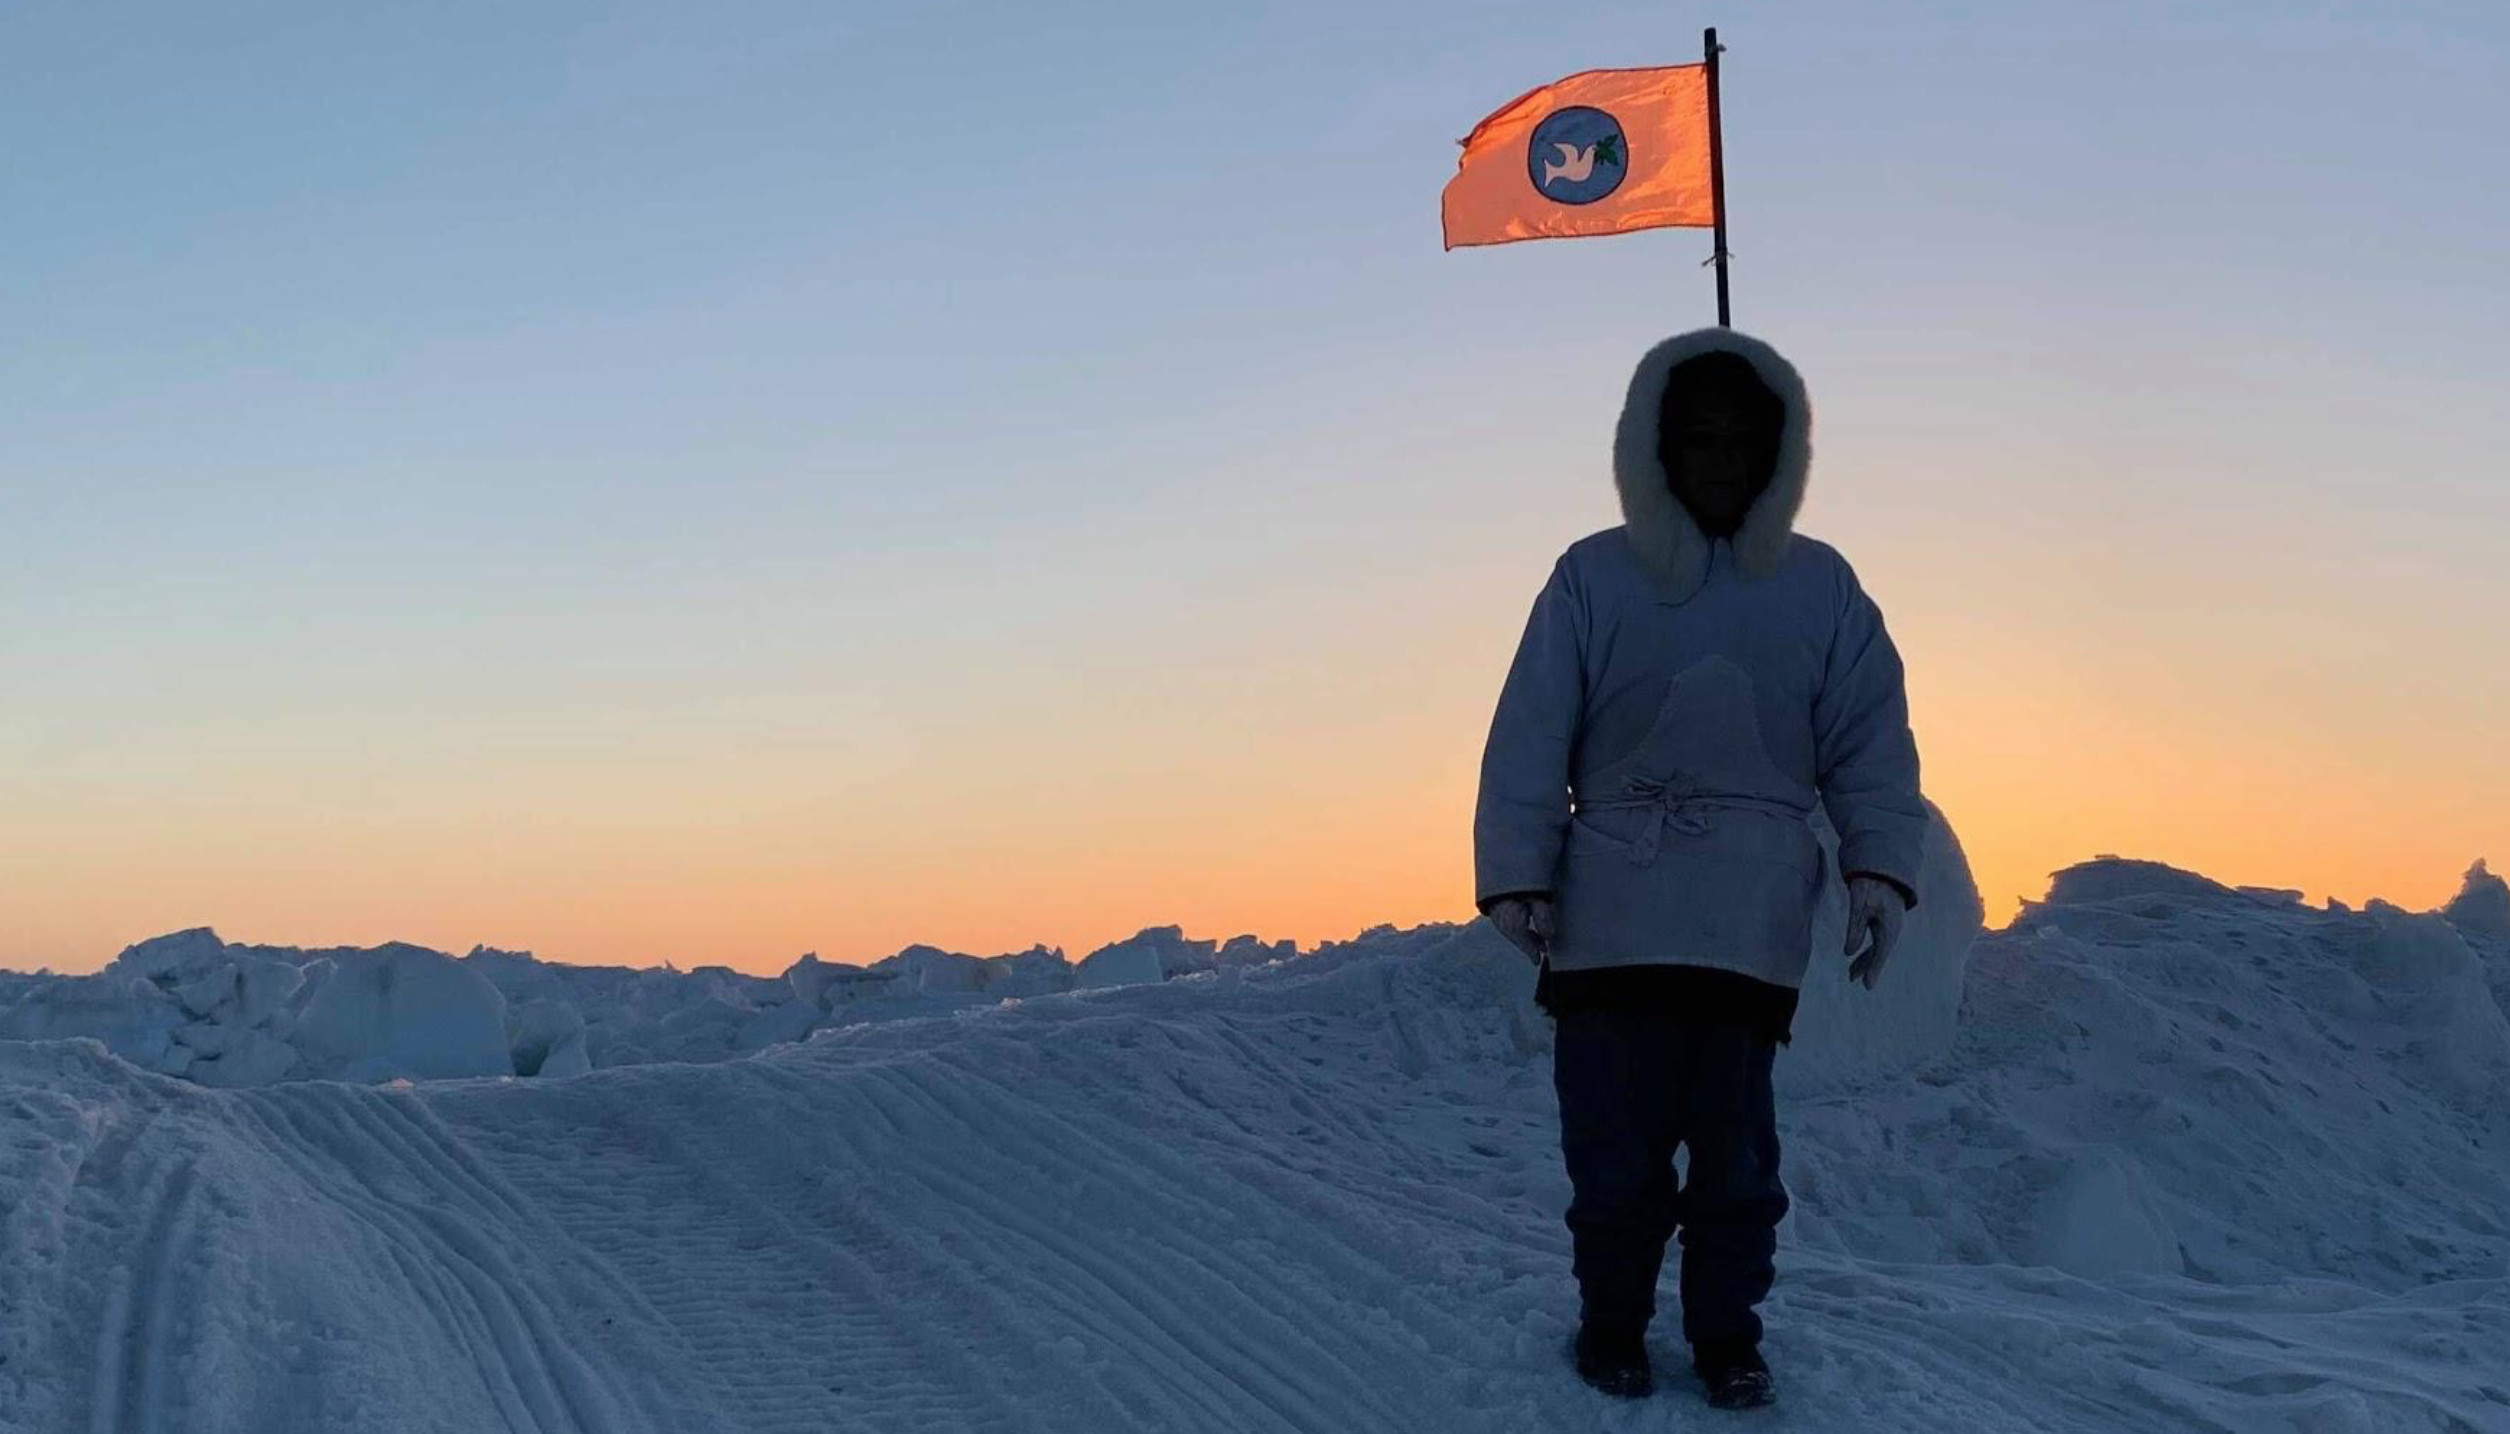 The flag of Gordon Ikayuak Brower successful whaling crew posted on the sea-ice. Photo: Courtesy of Gordon Ikayuak Brower